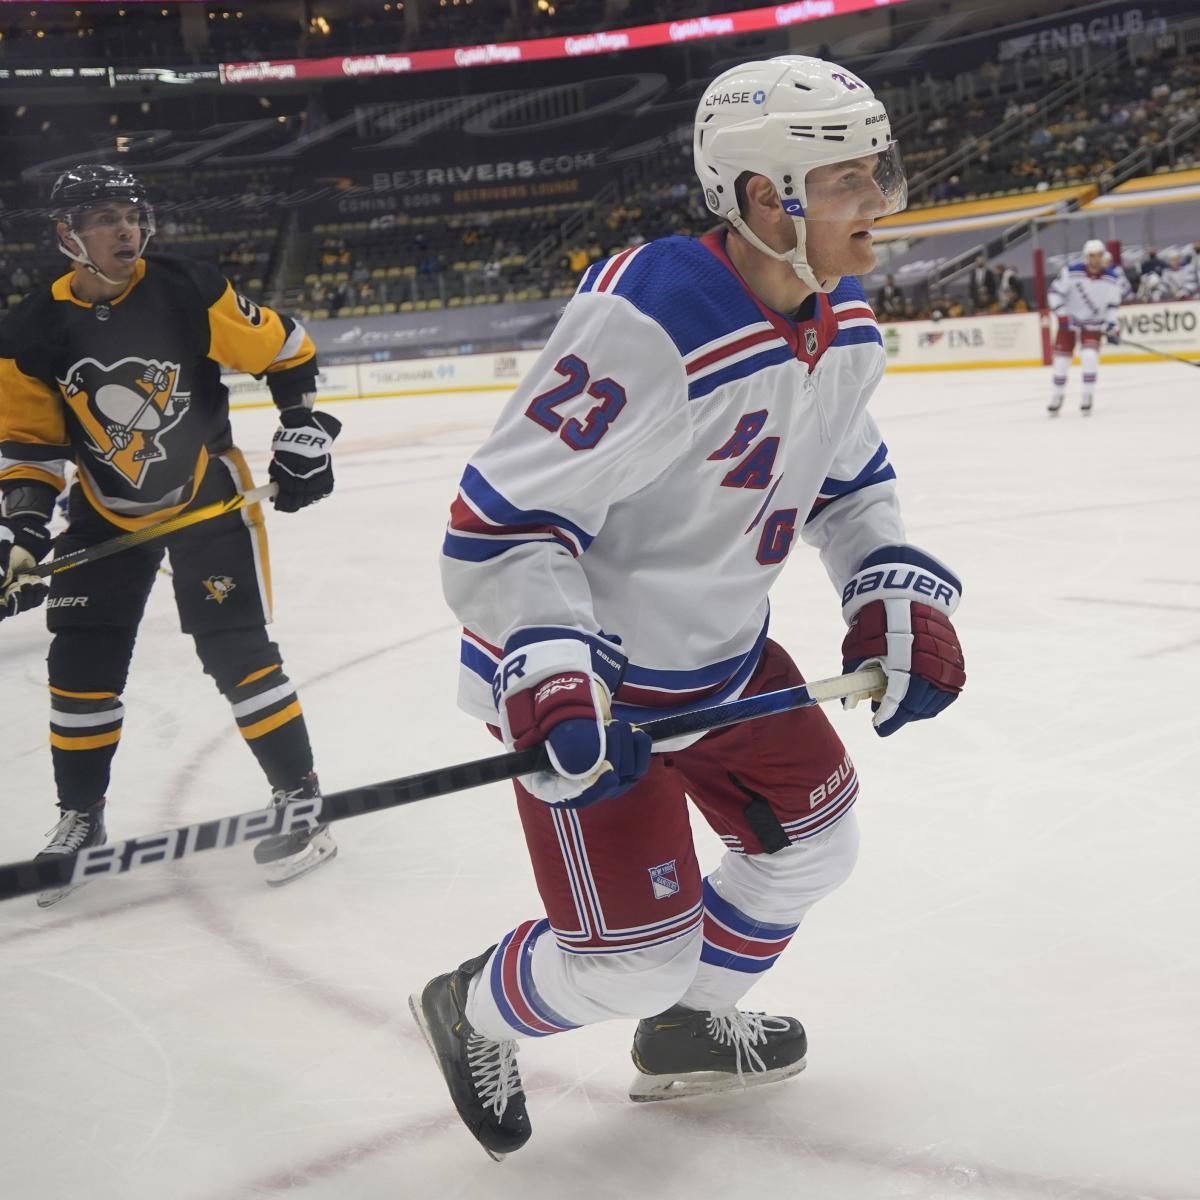 Need for speed: The New York Rangers must extend Michael Grabner